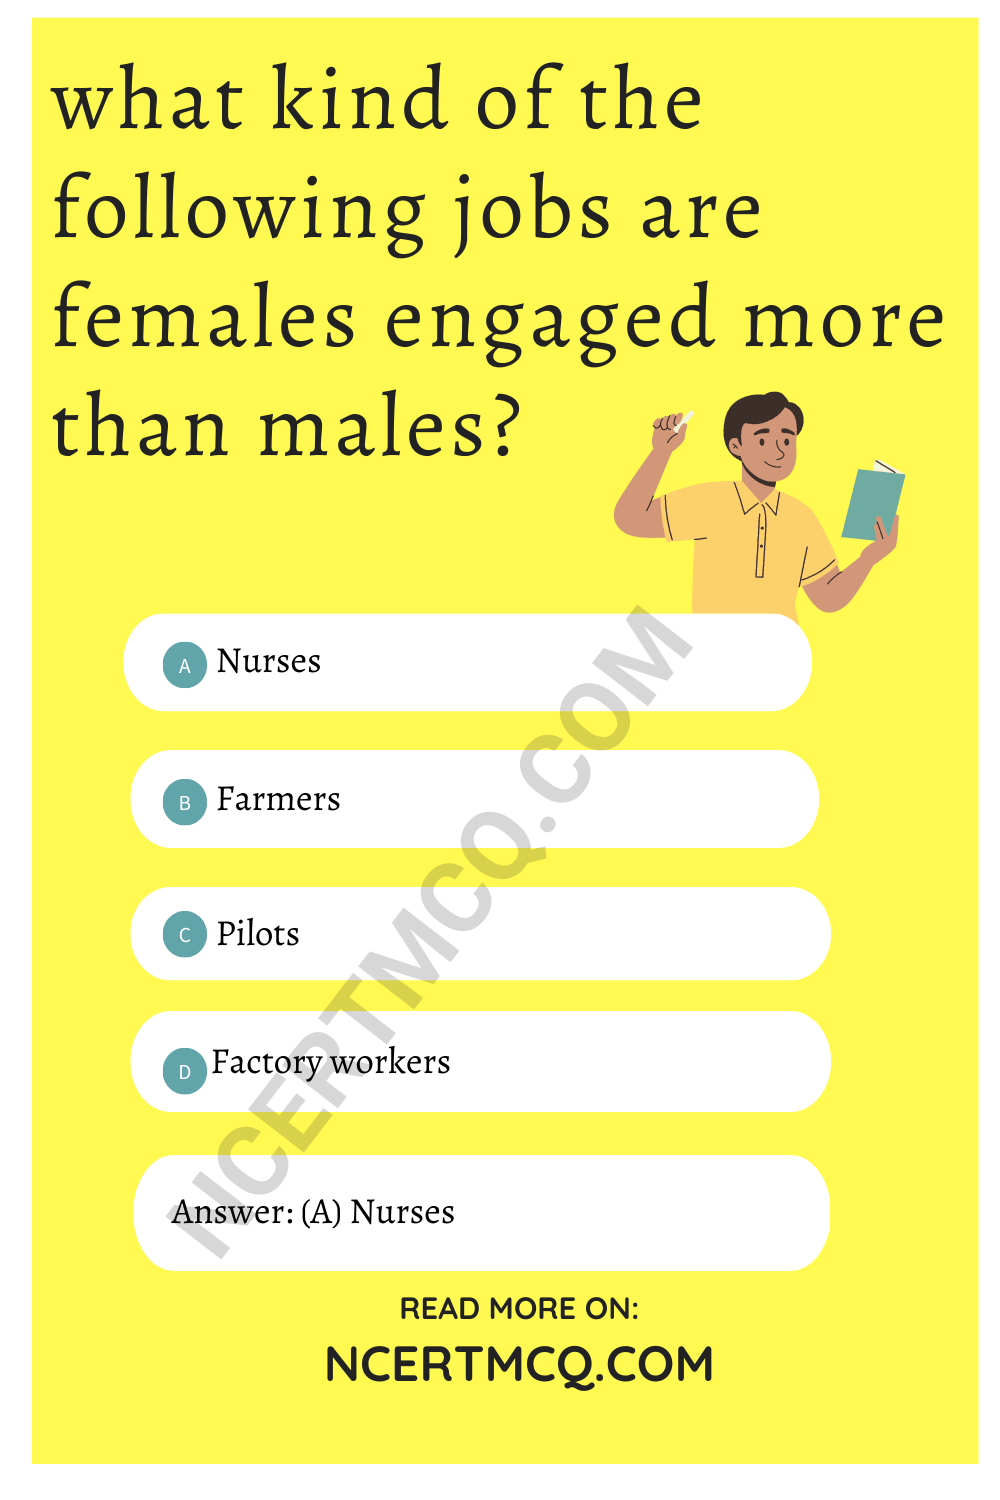 what kind of the following jobs are females engaged more than males?